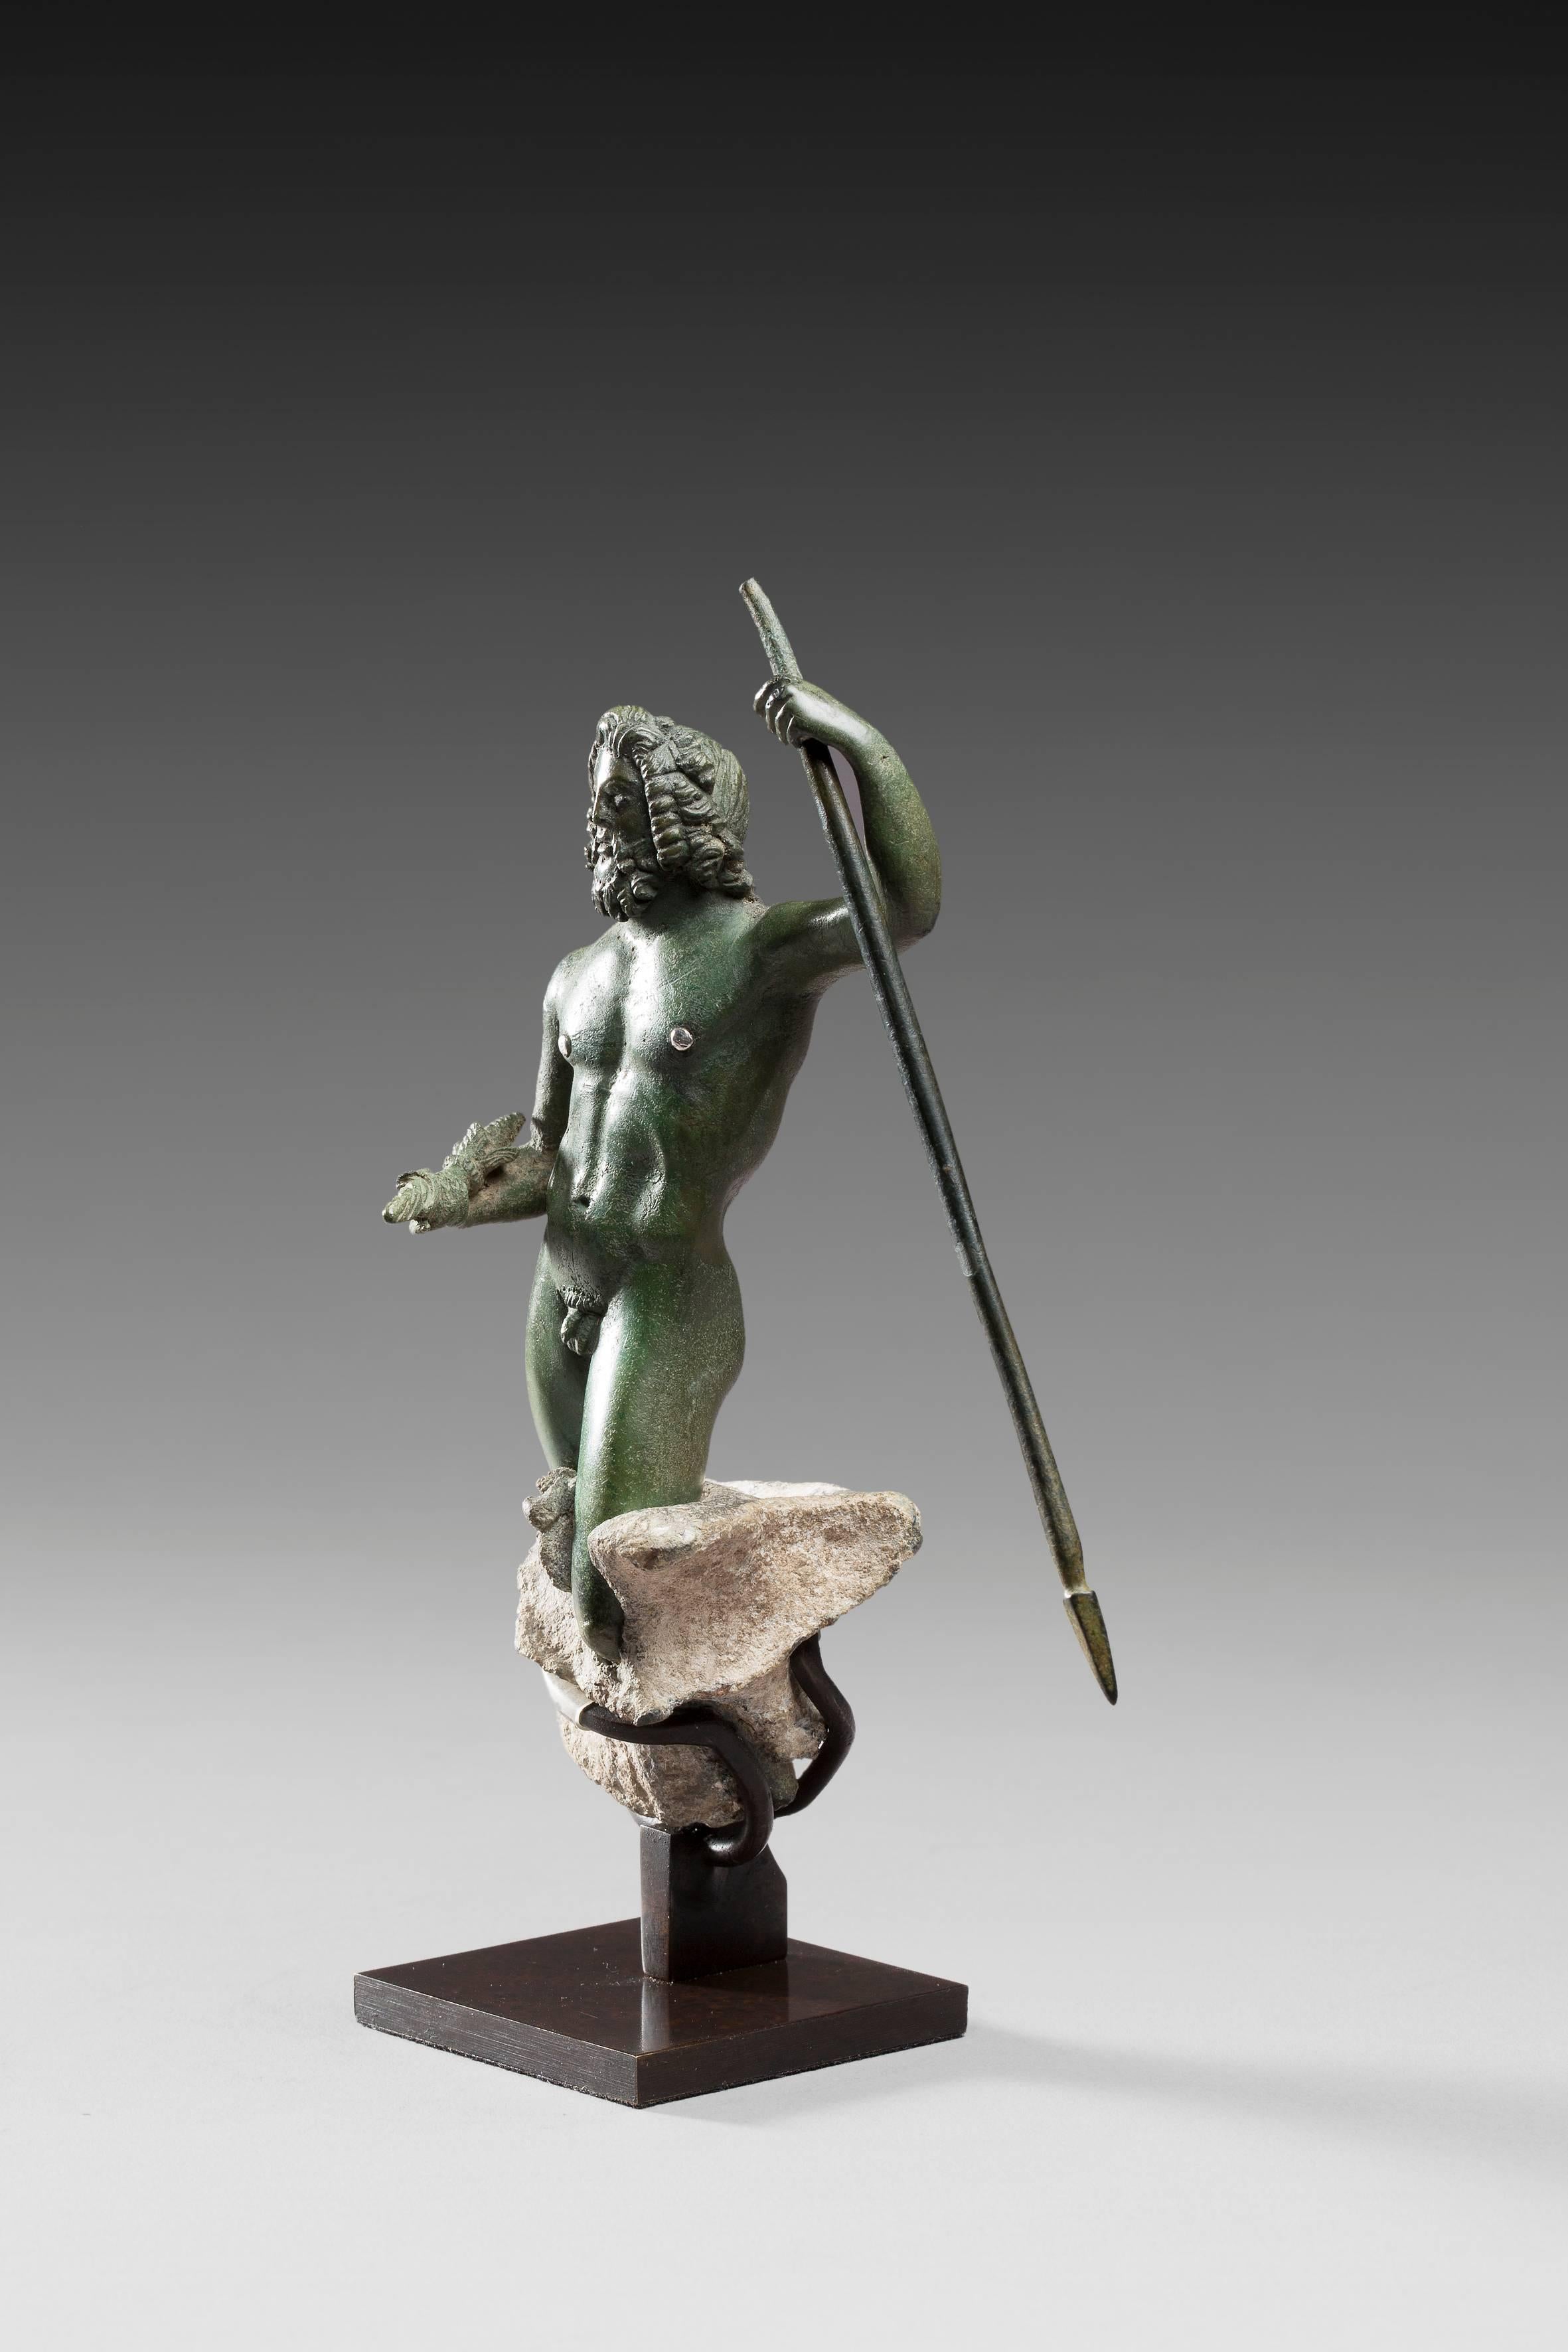 18th Century and Earlier Bronze Statuette Representing Zeus, Roman Art, 1st-2nd Century A.D. For Sale